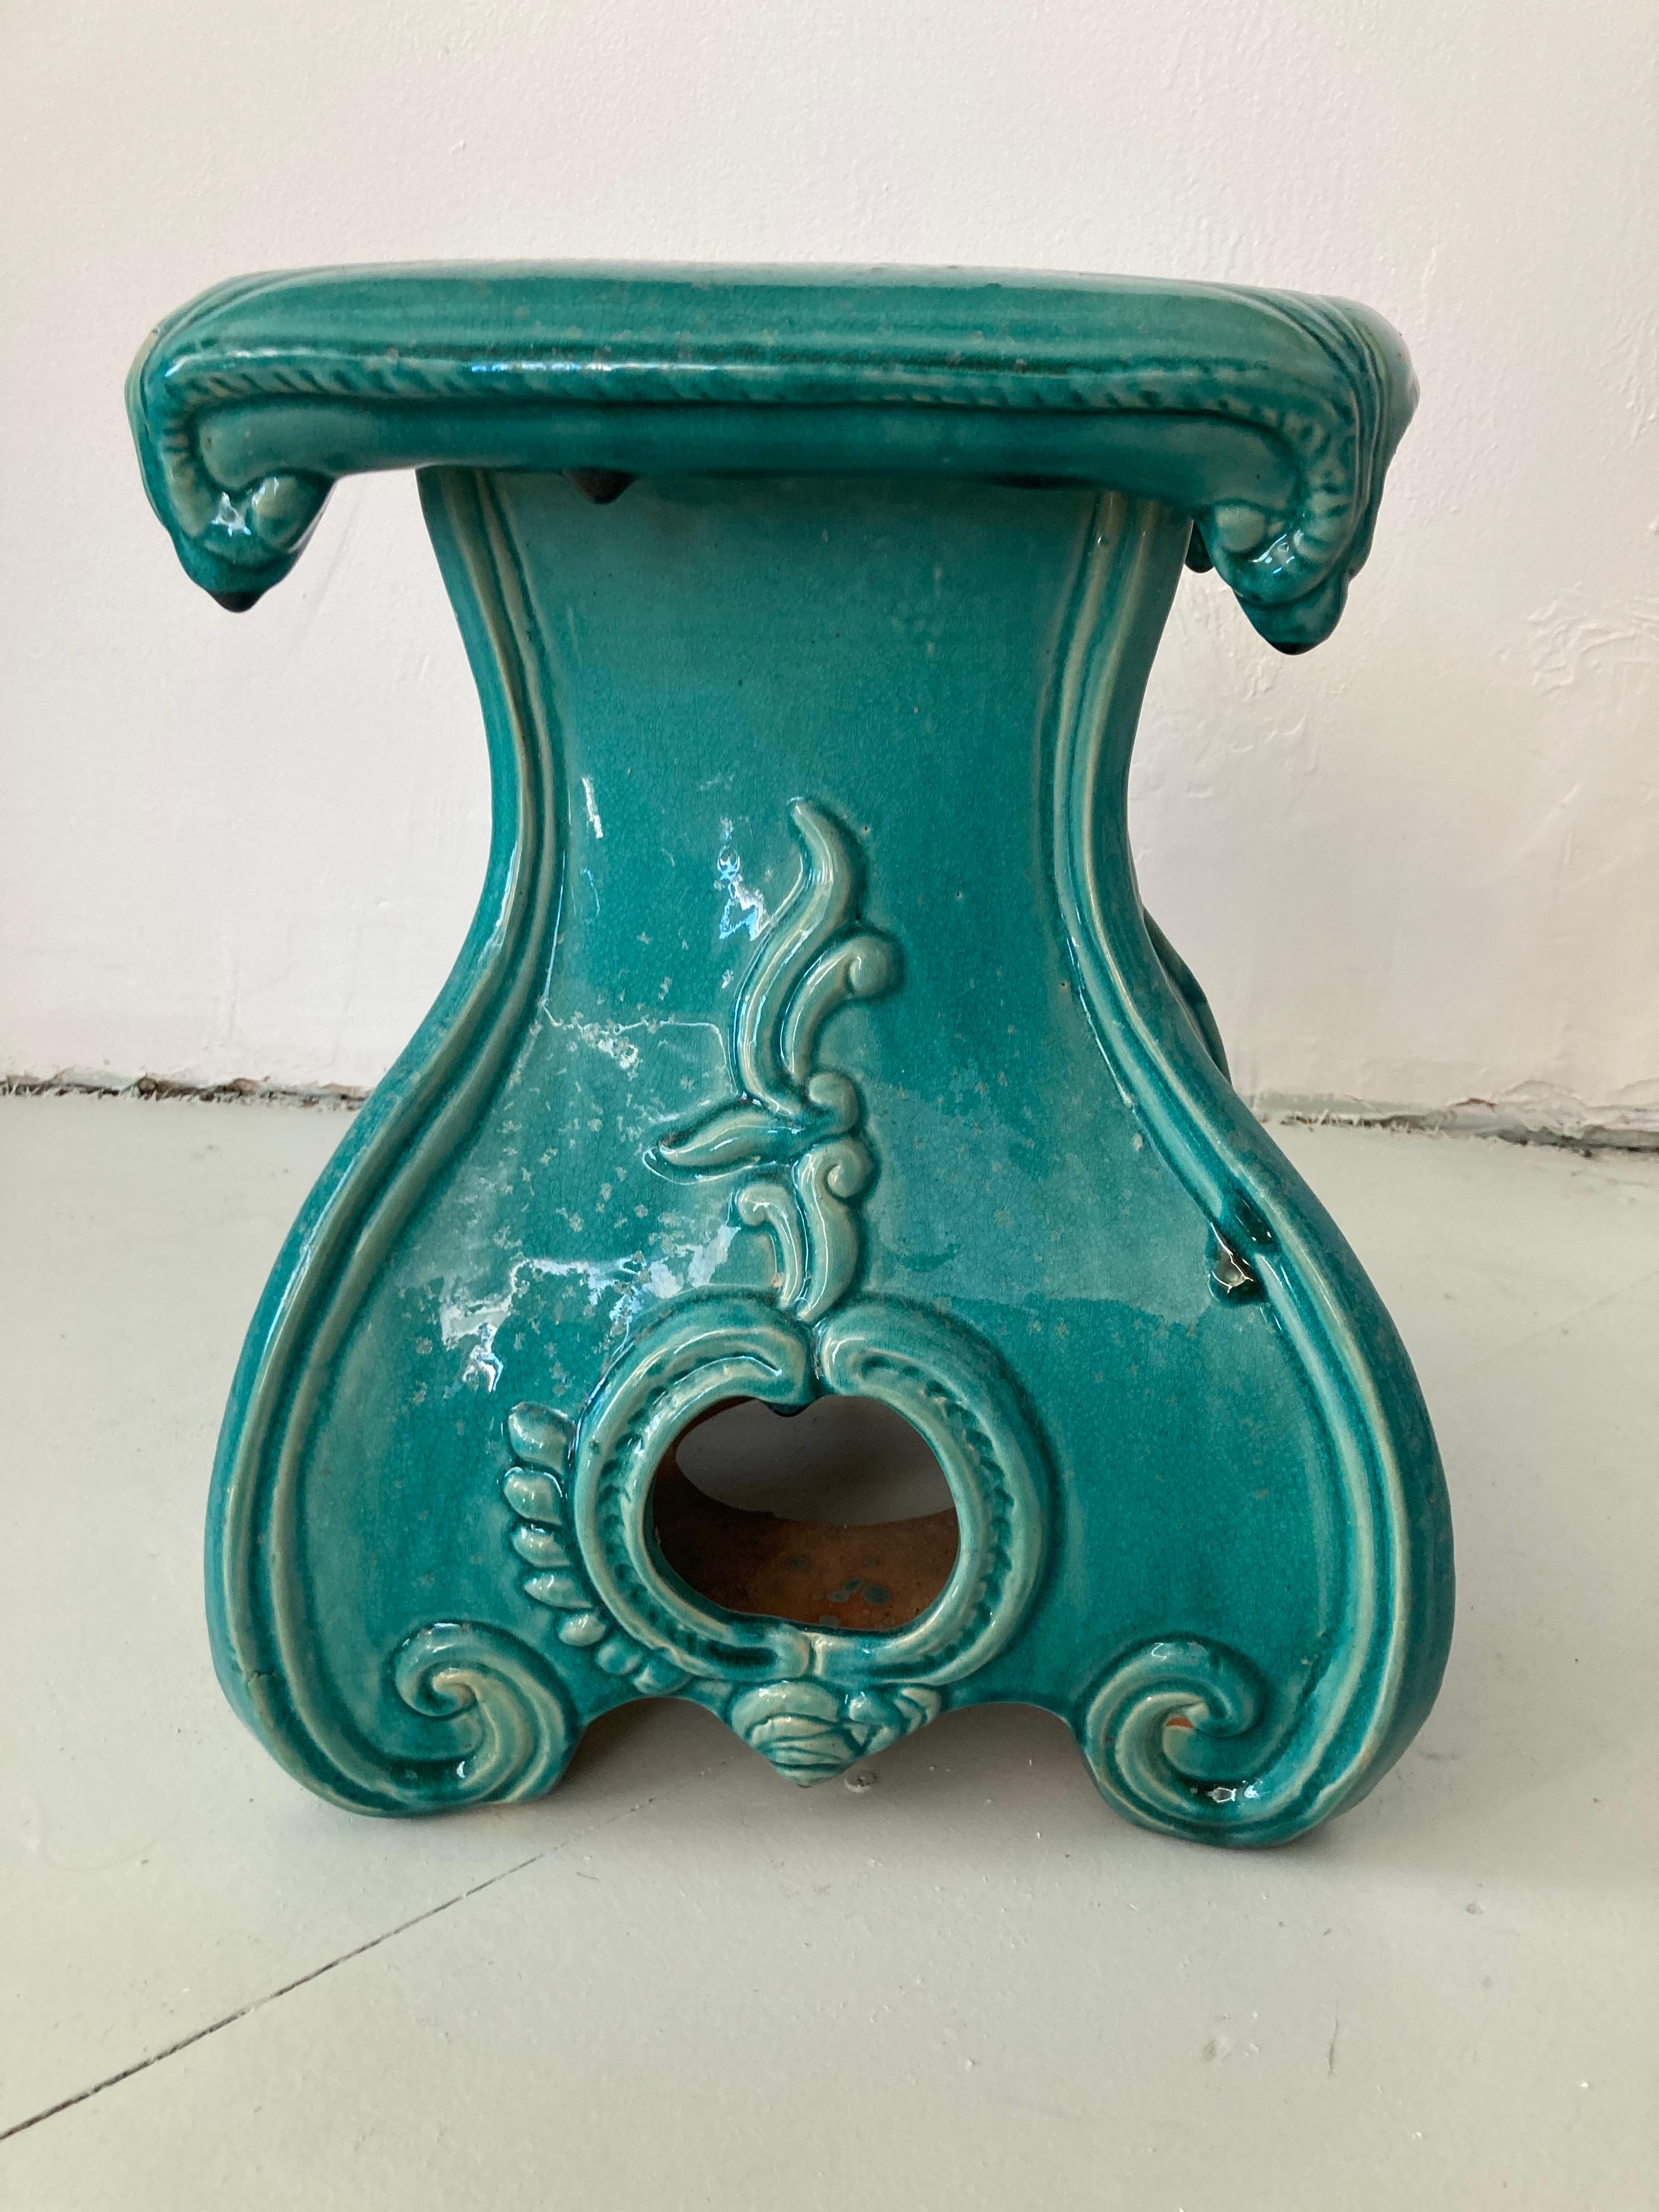 Fabulous Turquoise Glazed Terra Cotta Garden Seat from the early 1920’s . Amazing details . Add some classic style to your home.